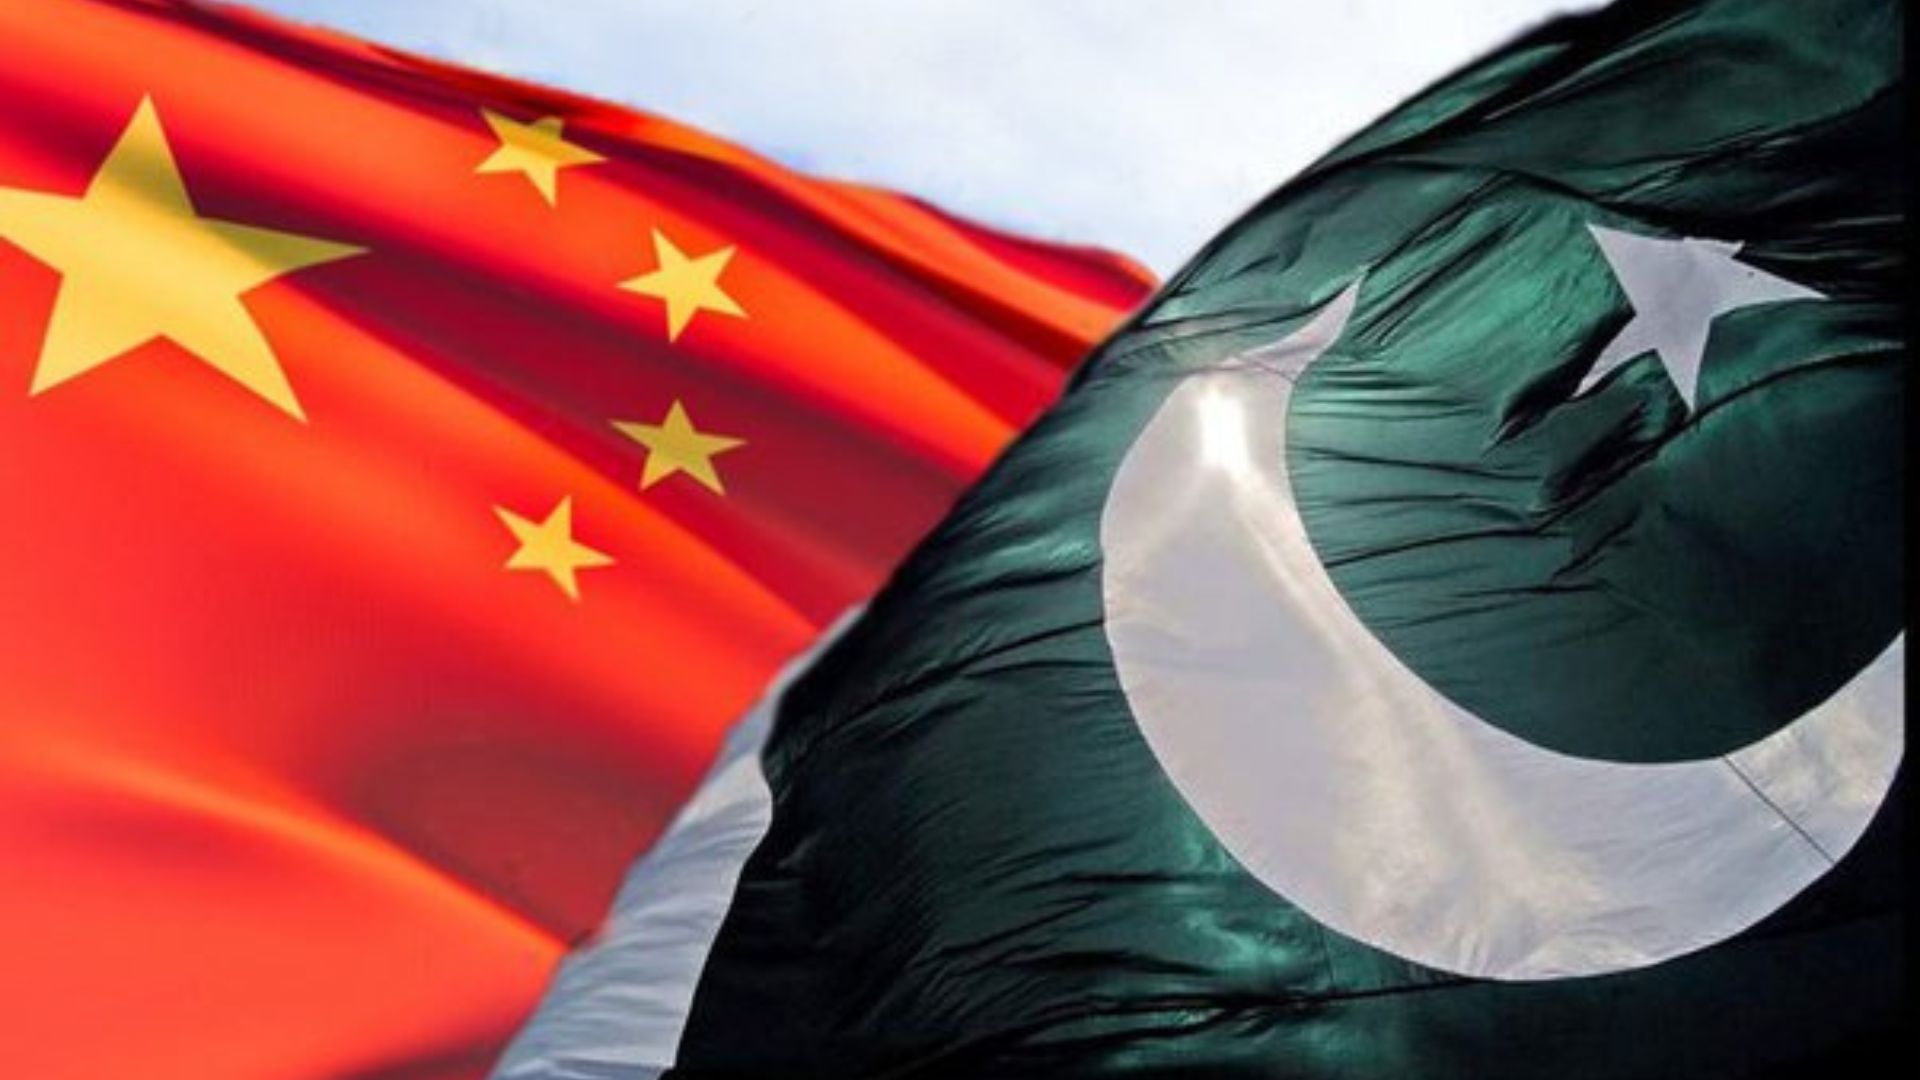 Pakistan’s Security Woes Strain Relations With Arab & Chinese Allies